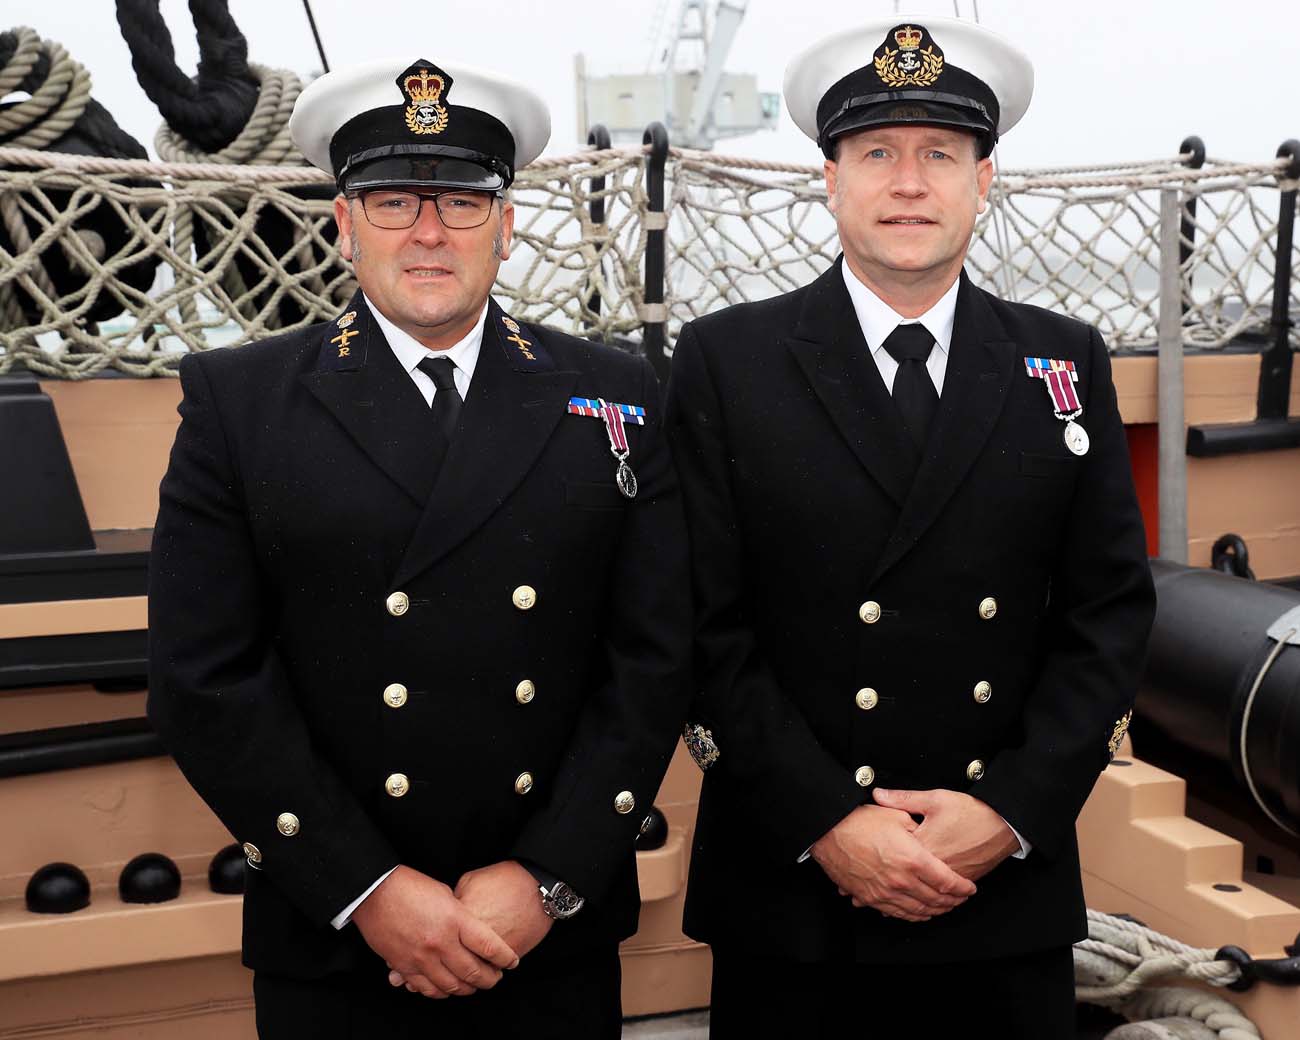 Two massive awards for MASF personnel | Royal Navy